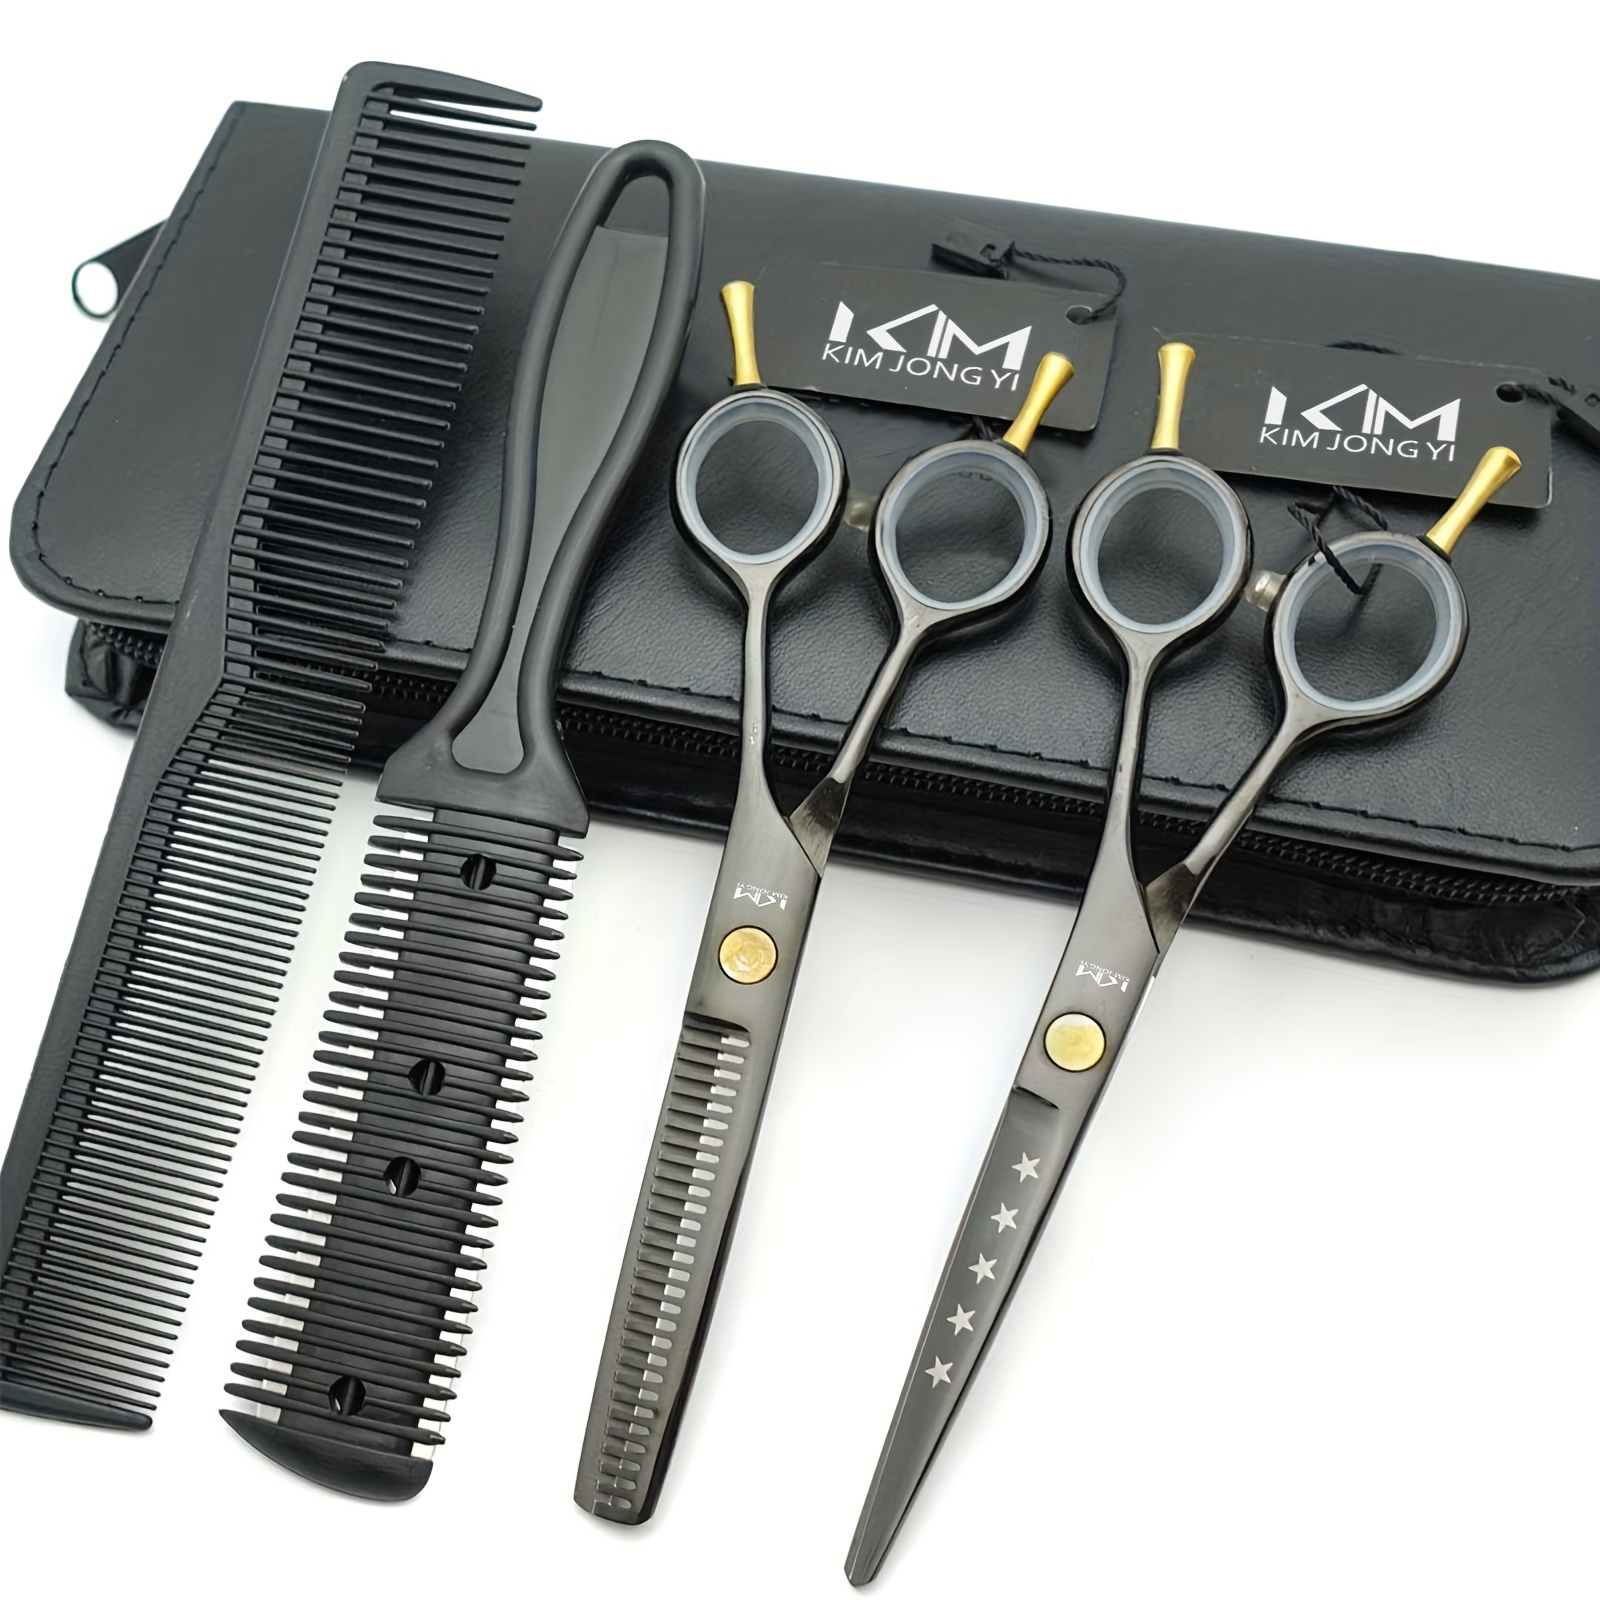 

Hair Cutting Scissors Set With Comb And Case, 6 Inch Hair Cutting Shears Hair Thinning Shears, Barber Salon Household Hair Styling Supplies